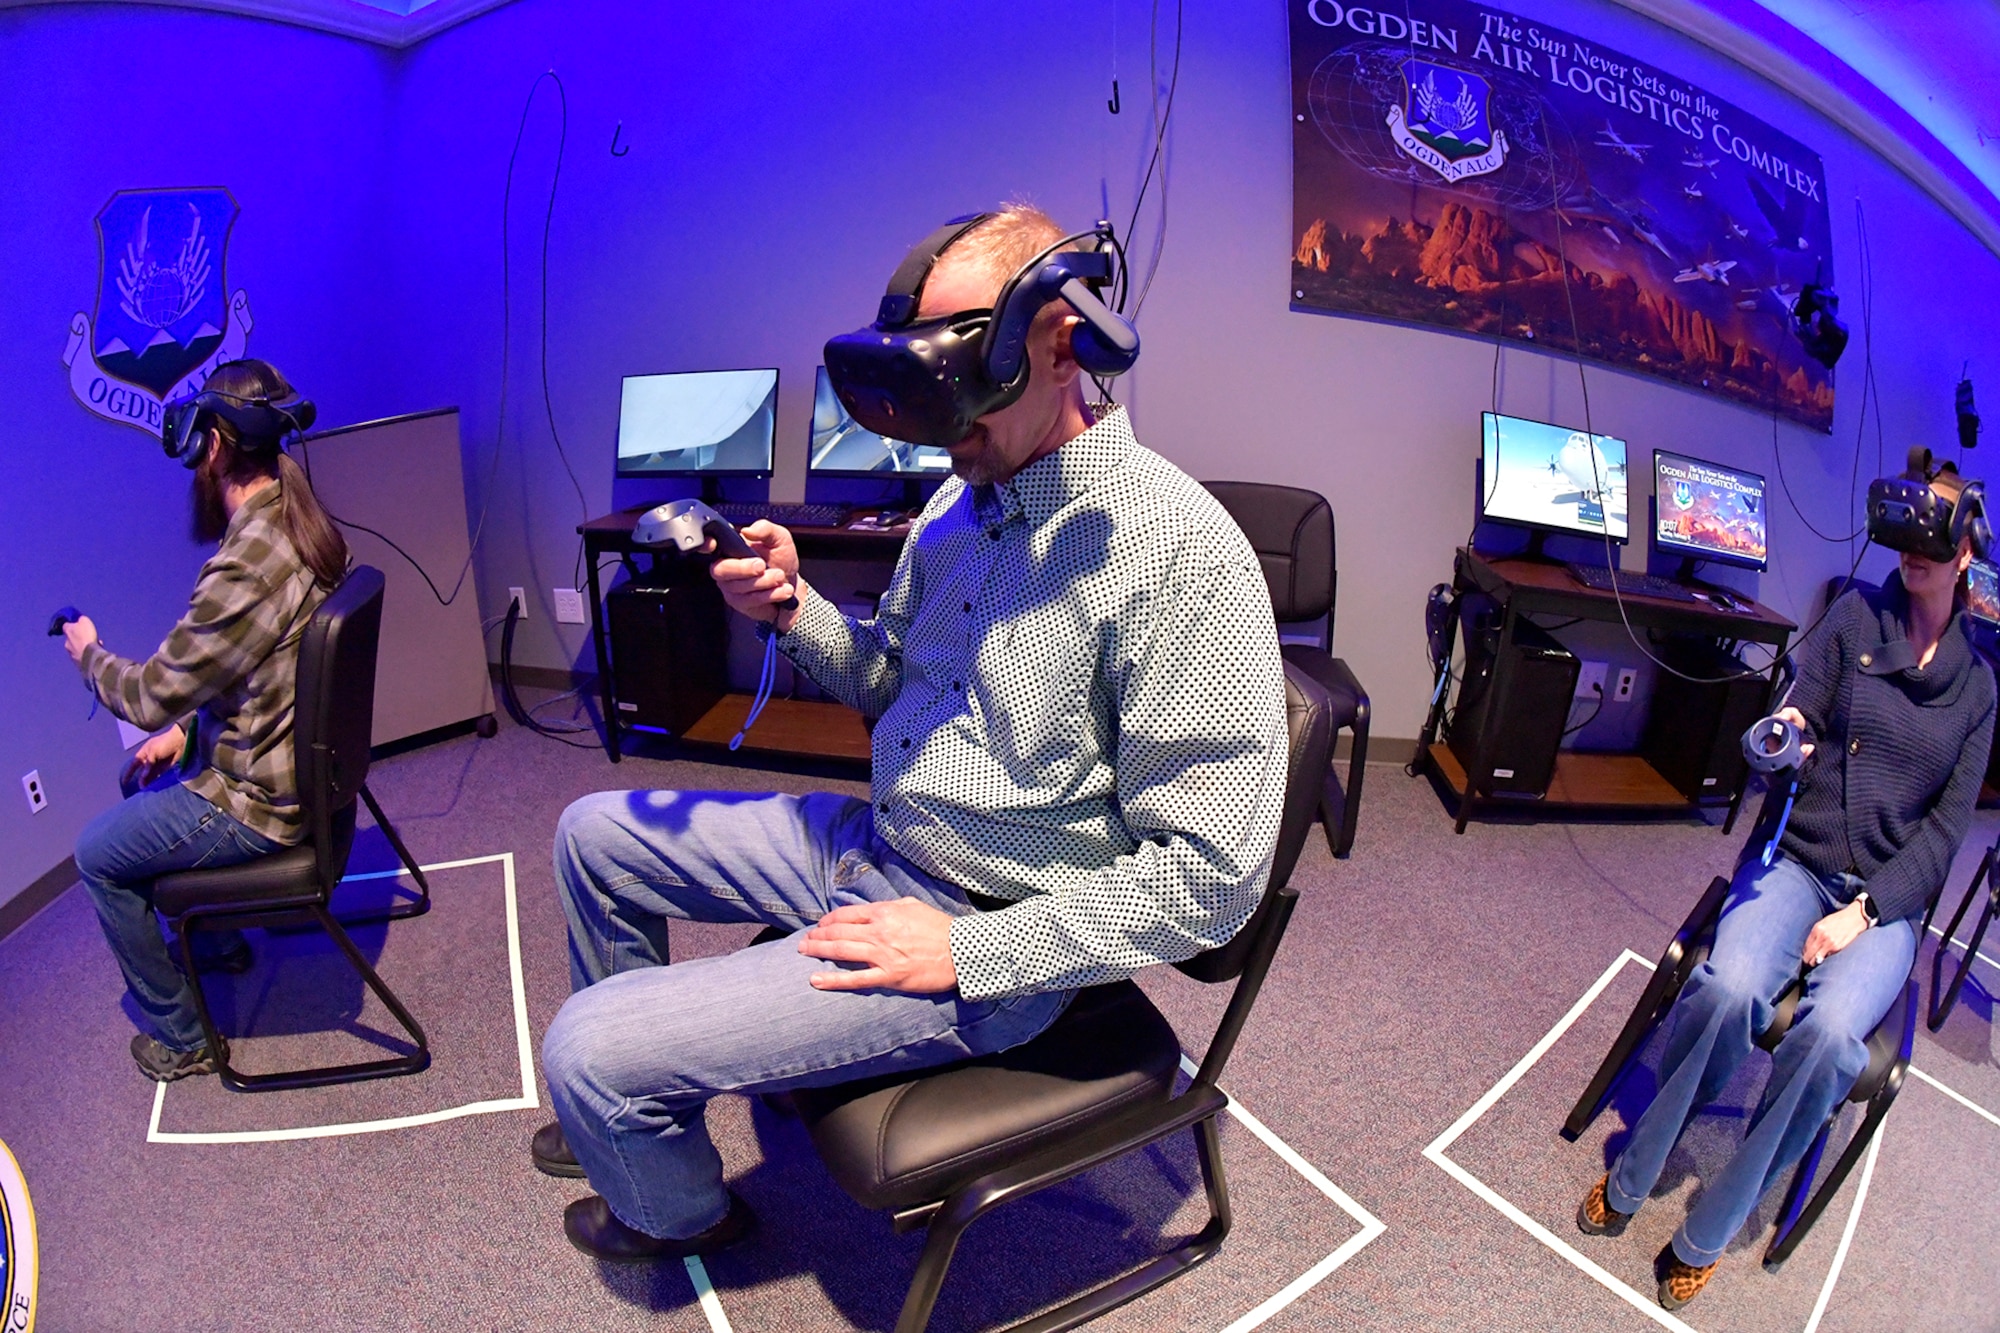 John Sowder, Chief of Maintenance Training Instruction, demonstrates the Ogden Air Logistics Complex Training Branch’s virtual reality training program in a state-of-the-art immersive classroom Feb. 12, 2024, at Hill Air Force Base, Utah. This innovative program within the Ogden ALC caters to both new hires and veteran workforce. (U.S. Air Force photo by Todd Cromar)